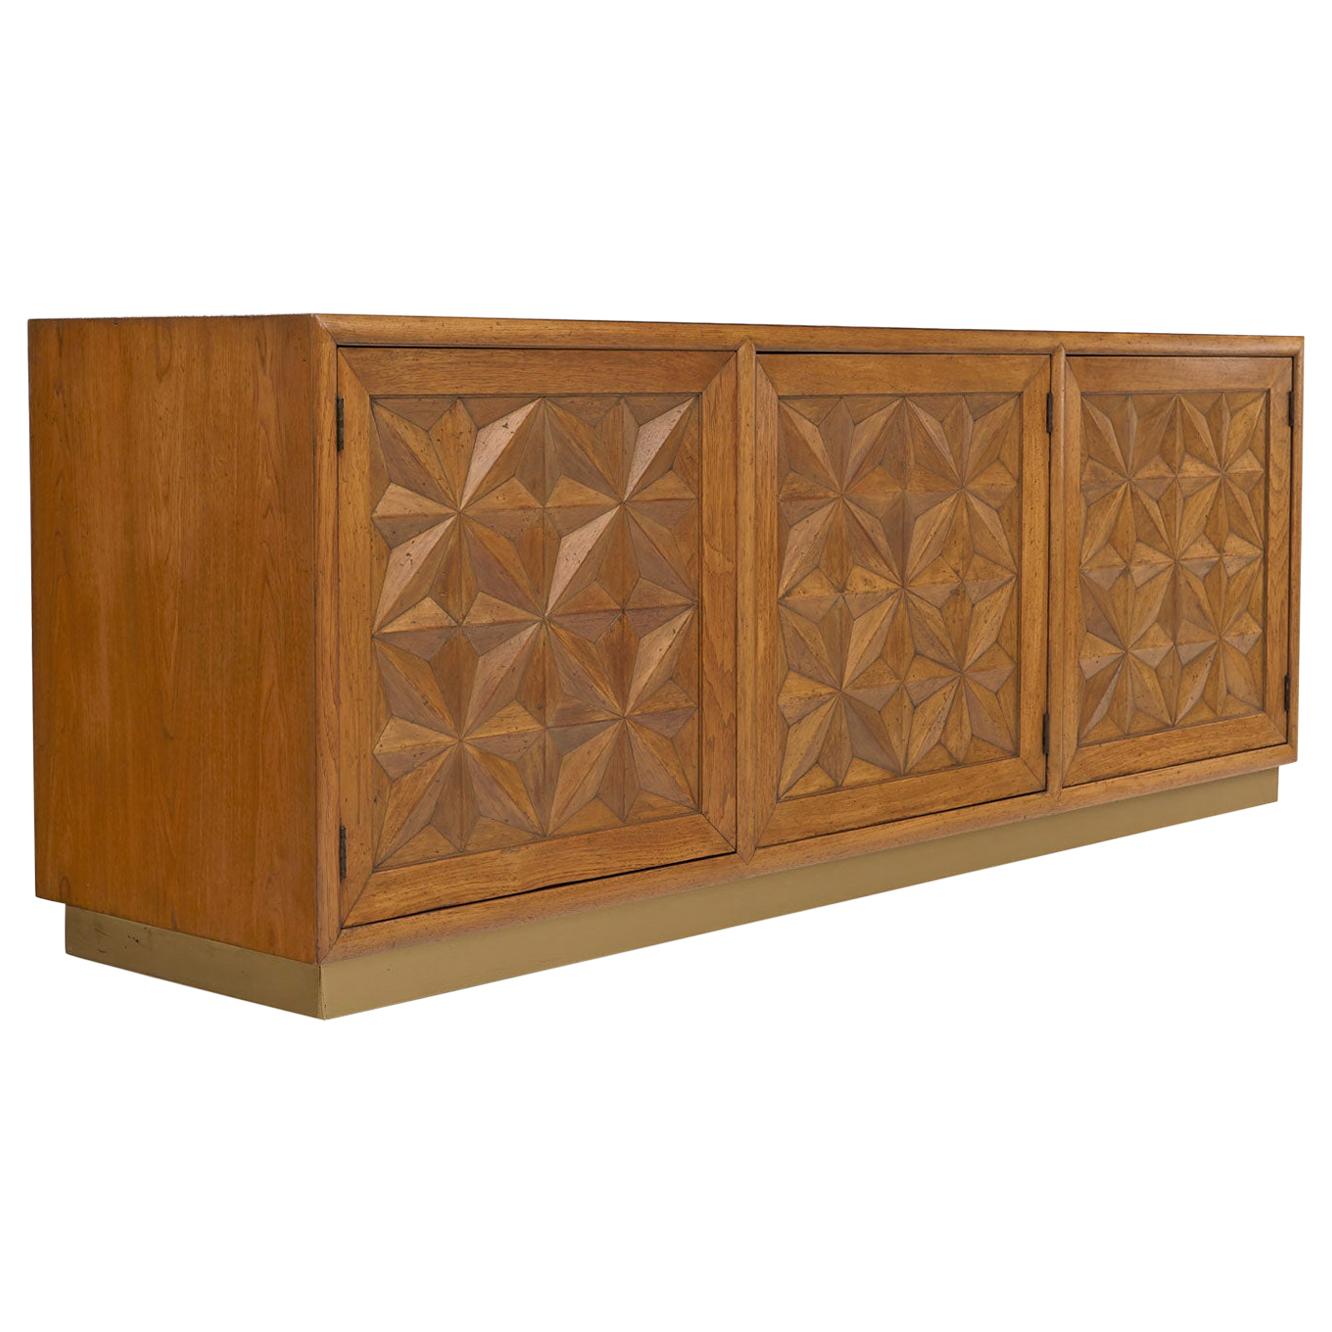 Midcentury Hollywood Regency Henredon credenza sideboard or buffet. Time capsule piece in outstanding condition. Stunning diamond starburst design adorns the front facade. The deep geometrical relief motif is signature of the Moroccan style. The all